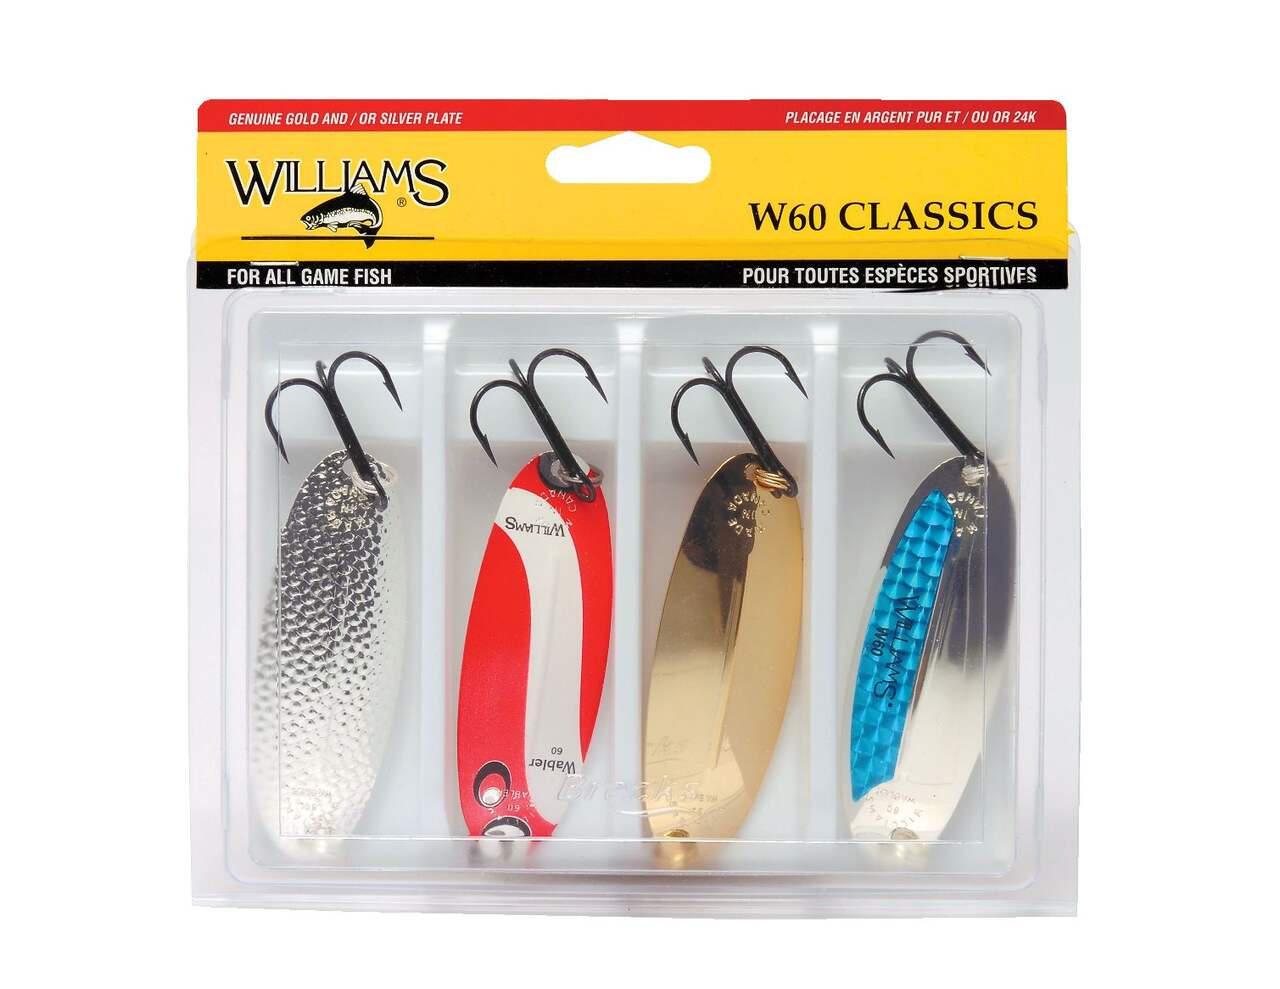 https://media-www.canadiantire.ca/product/playing/fishing/fishing-lures/0783007/williams-w60-wabler-kit-4-pack-3-25-6e006253-ce34-48b3-935d-4581aa107b48-jpgrendition.jpg?imdensity=1&imwidth=640&impolicy=mZoom